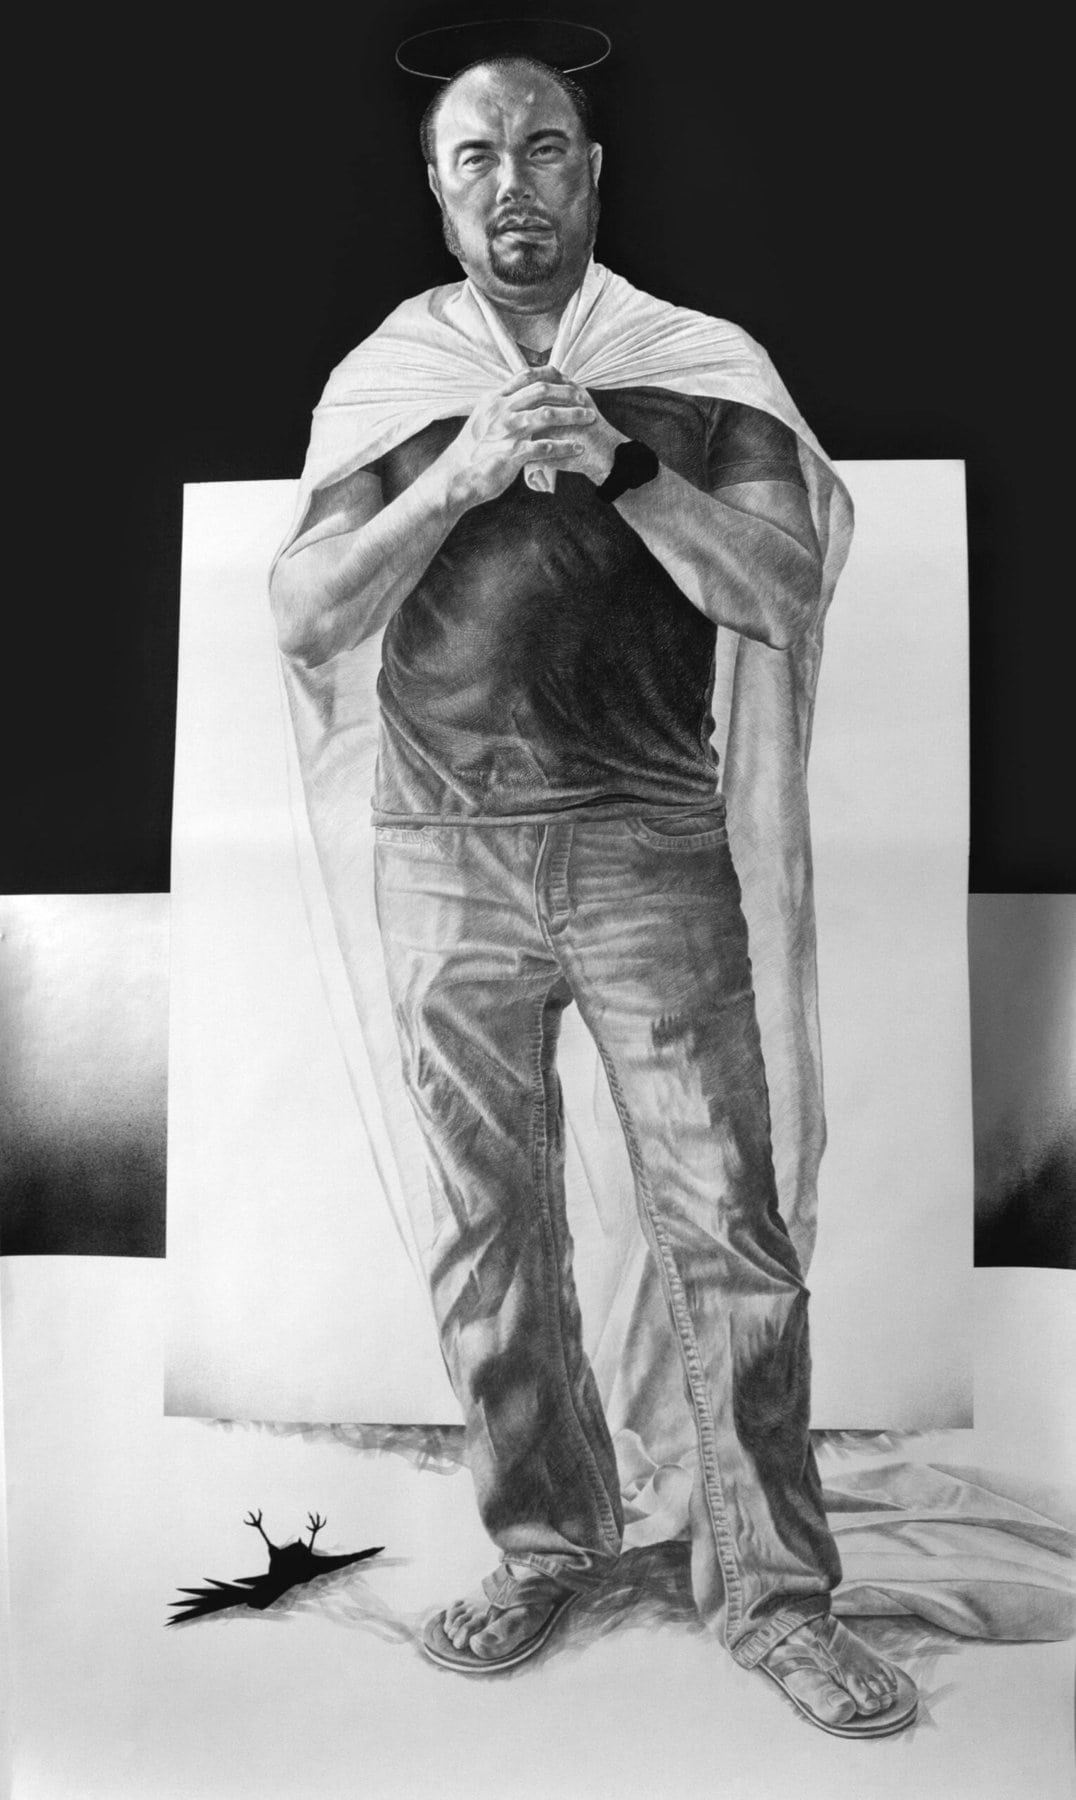 Abel Alejandre, "I Can Do Anything", graphite and paint on paper, 2015